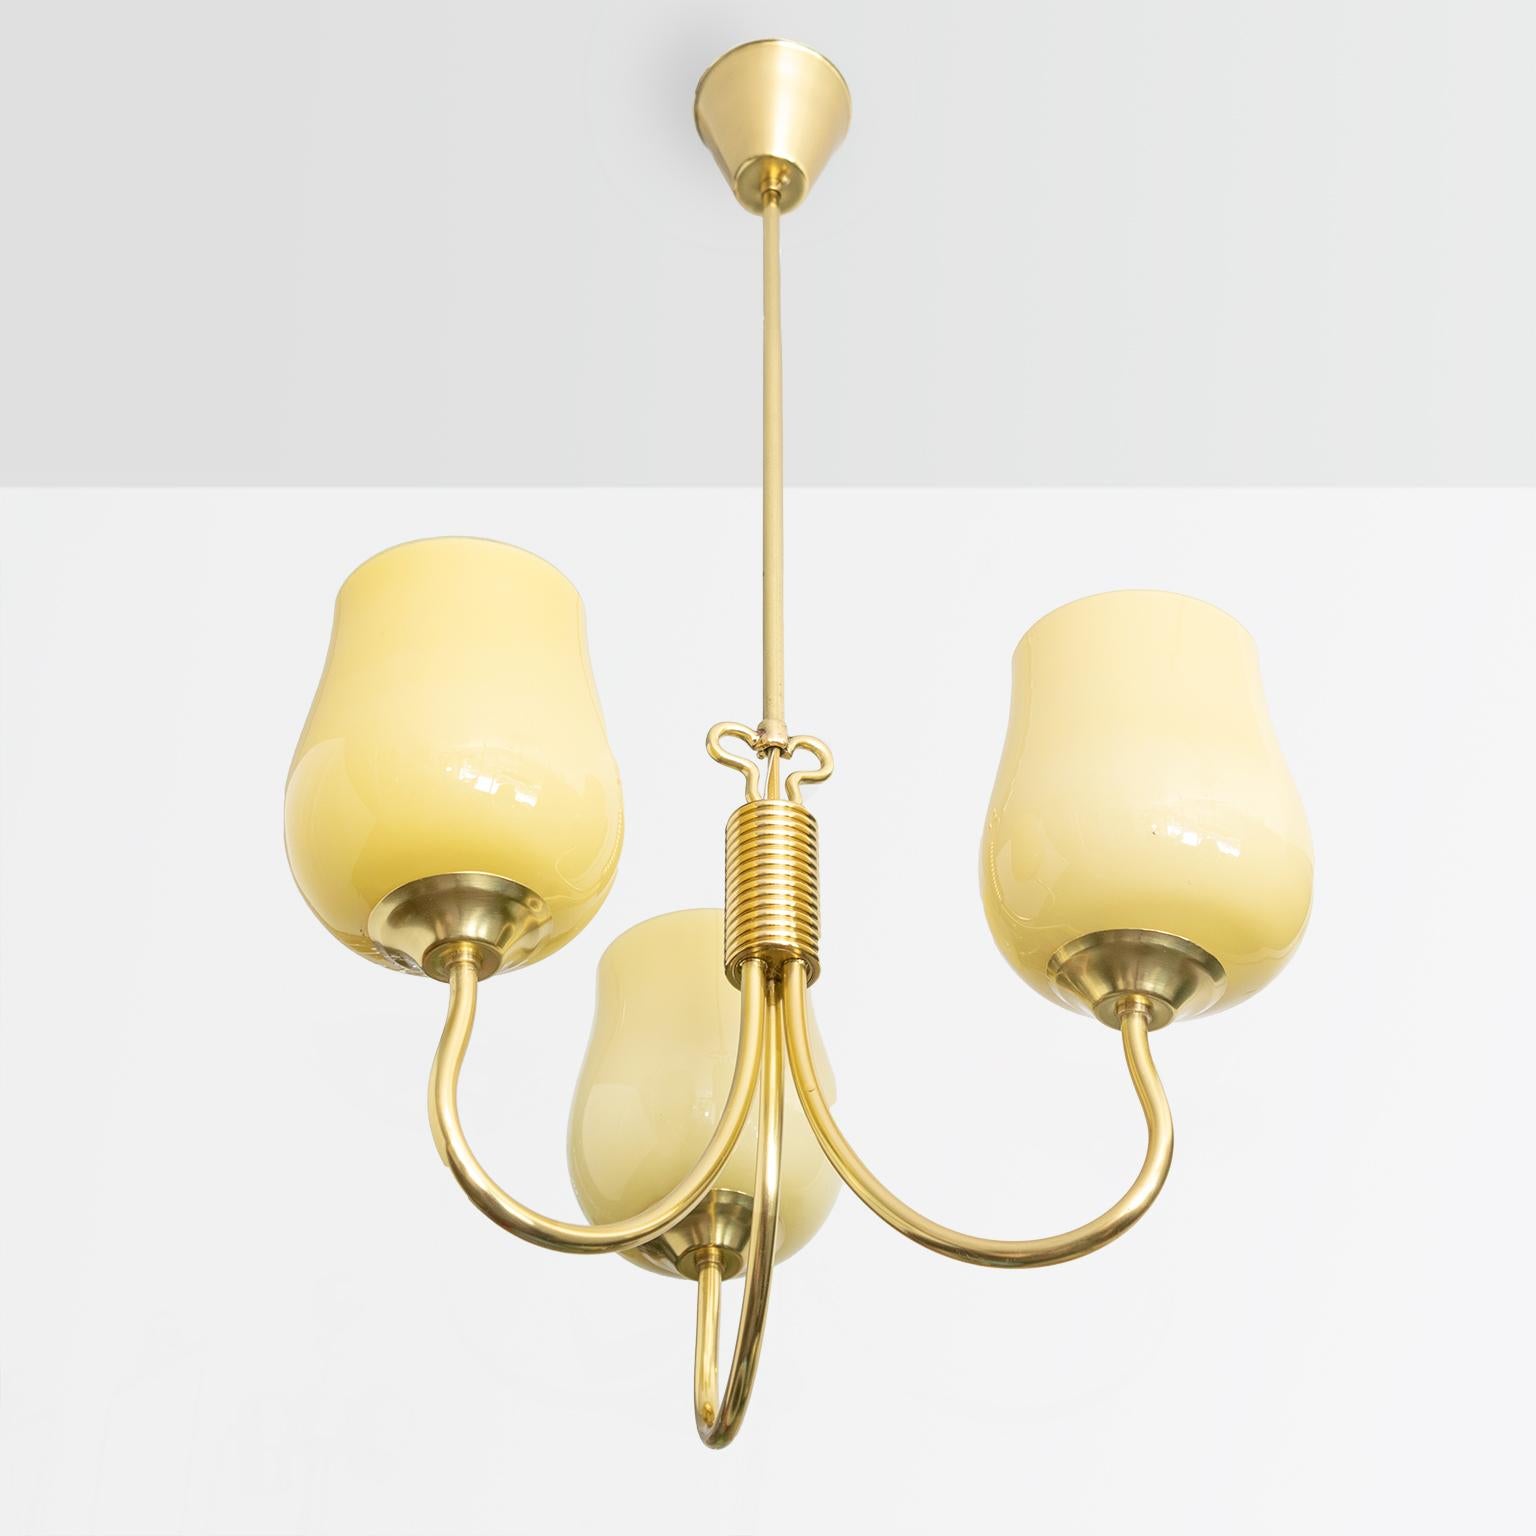 A polished brass Scandinavian Modern 3-arm pendant designed by Mauri Almari for Idman, Finland, late 1940s. The lamp has been newly polished and newly rewired with 3 standard sockets for use in the USA. Shades are original.

Measures: Height 35“,